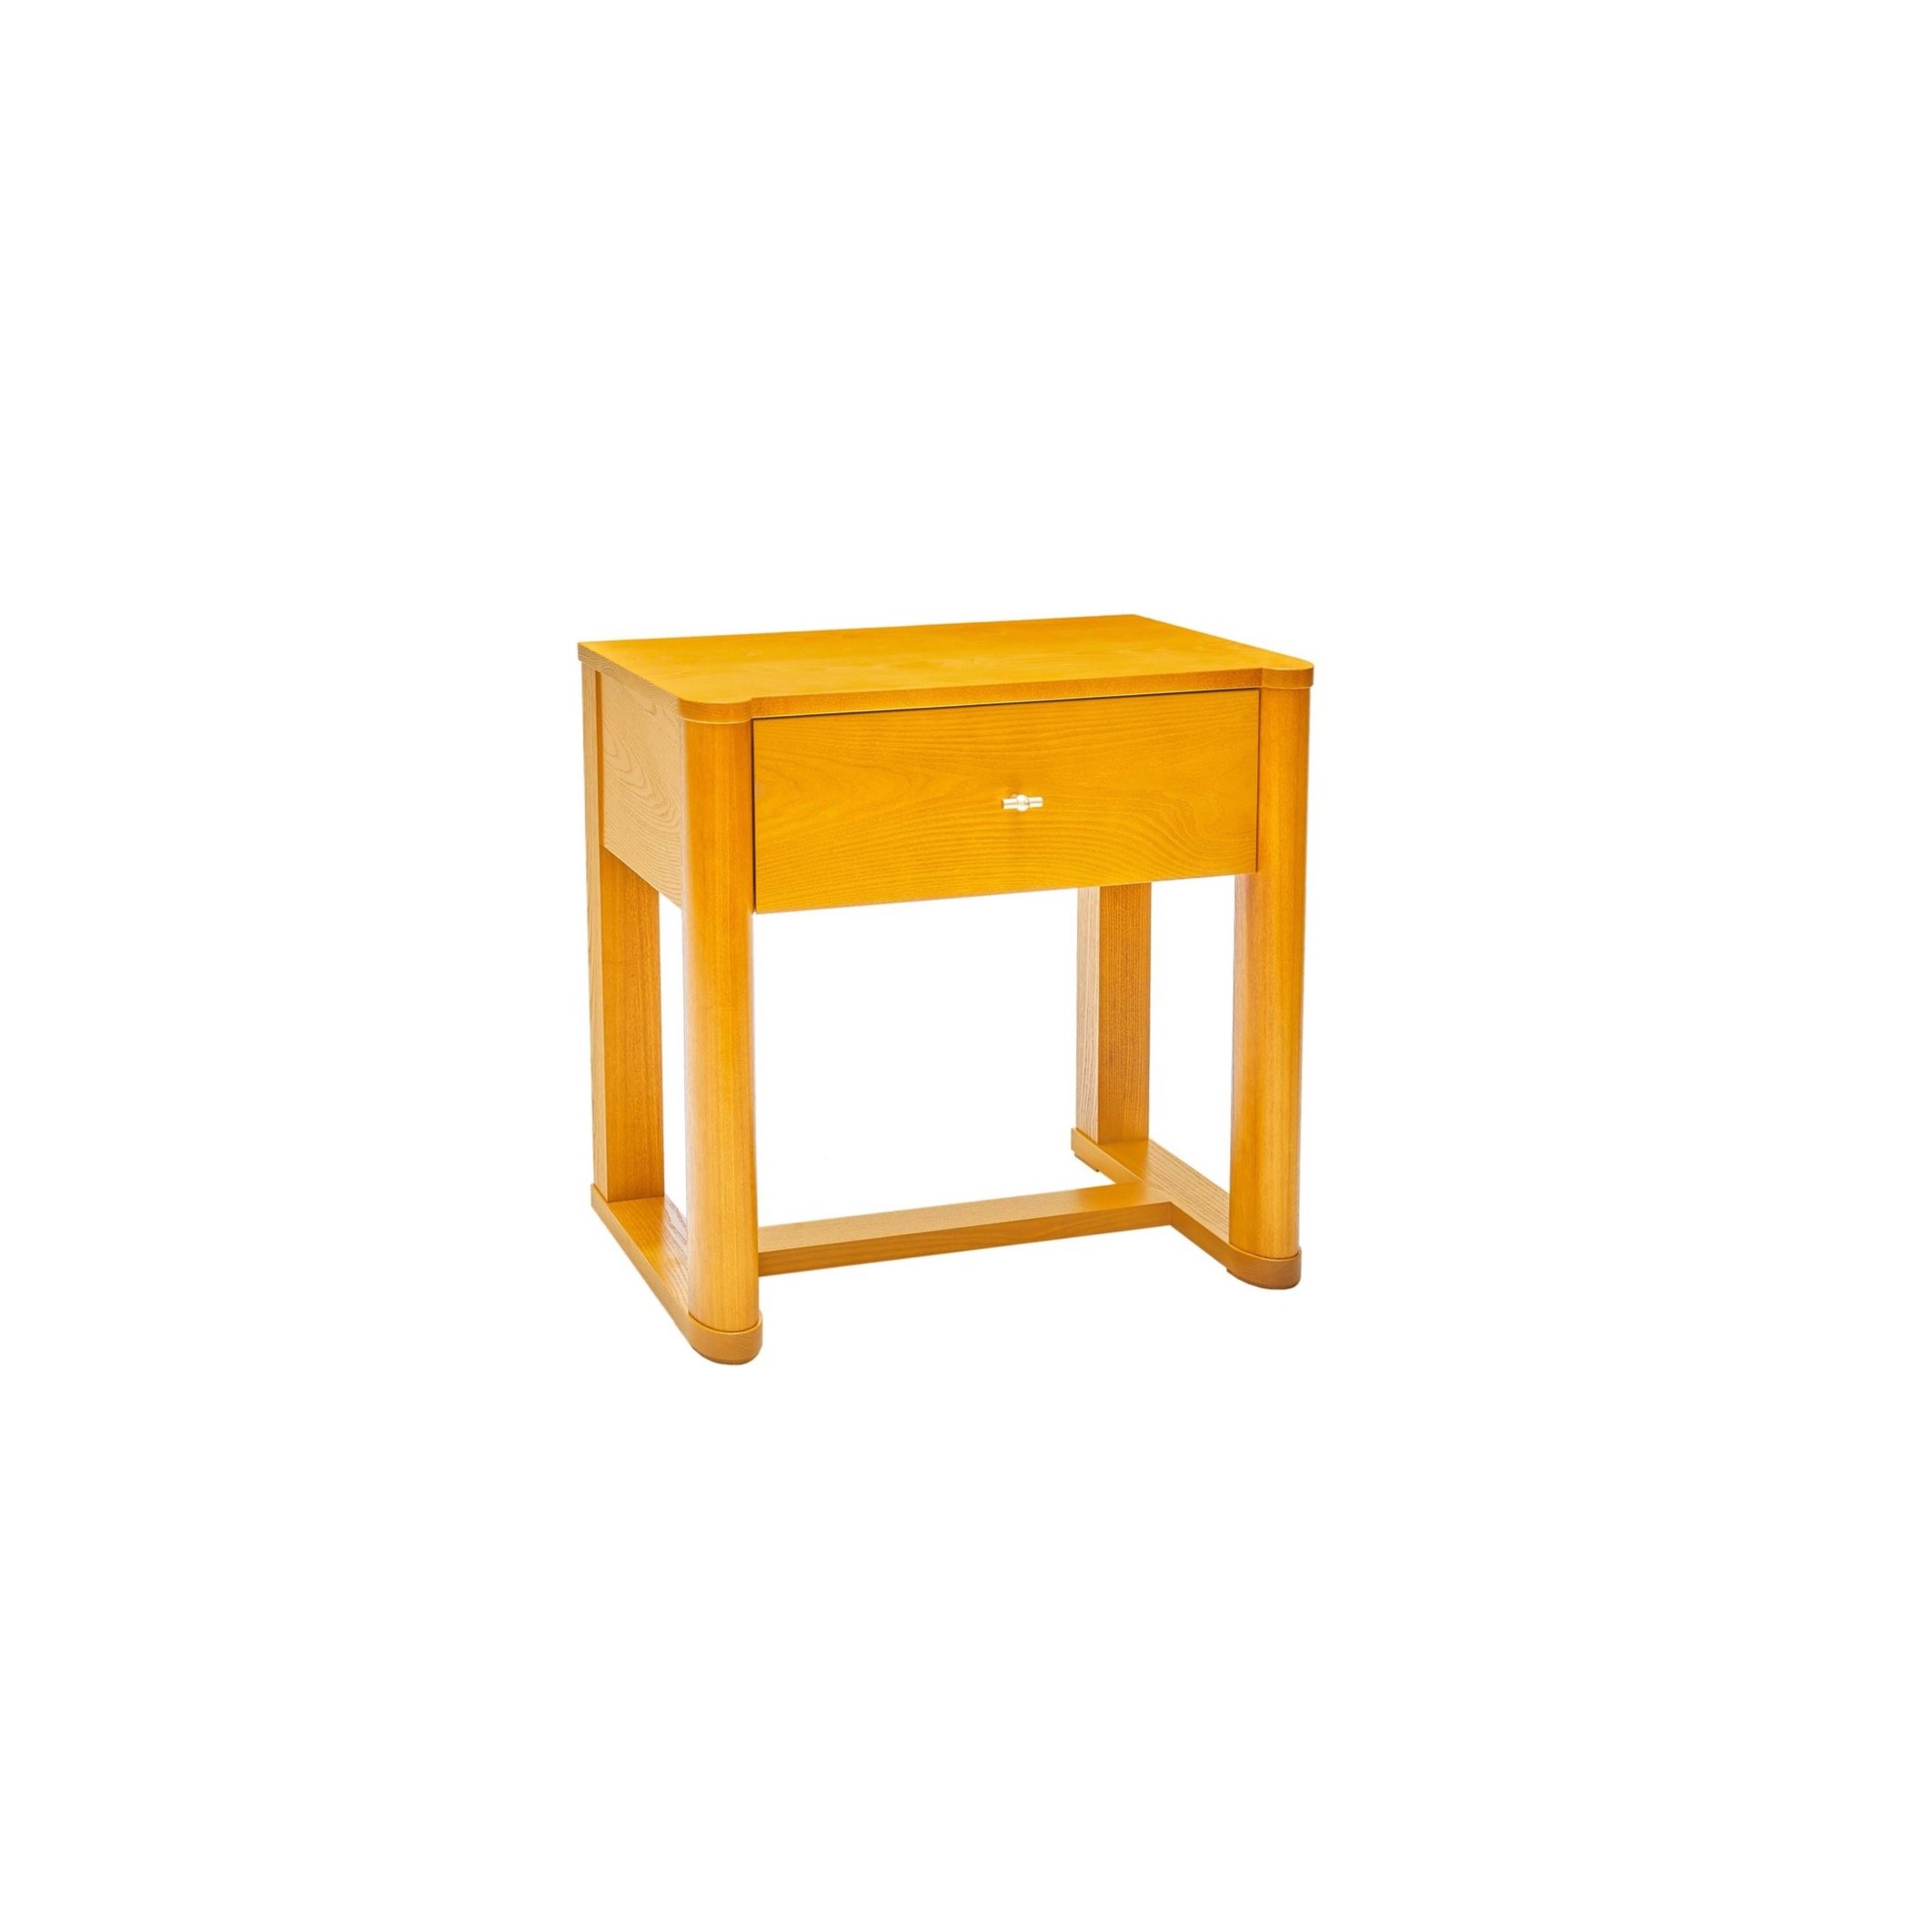 HULL BEDSIDE TABLE - $3,360